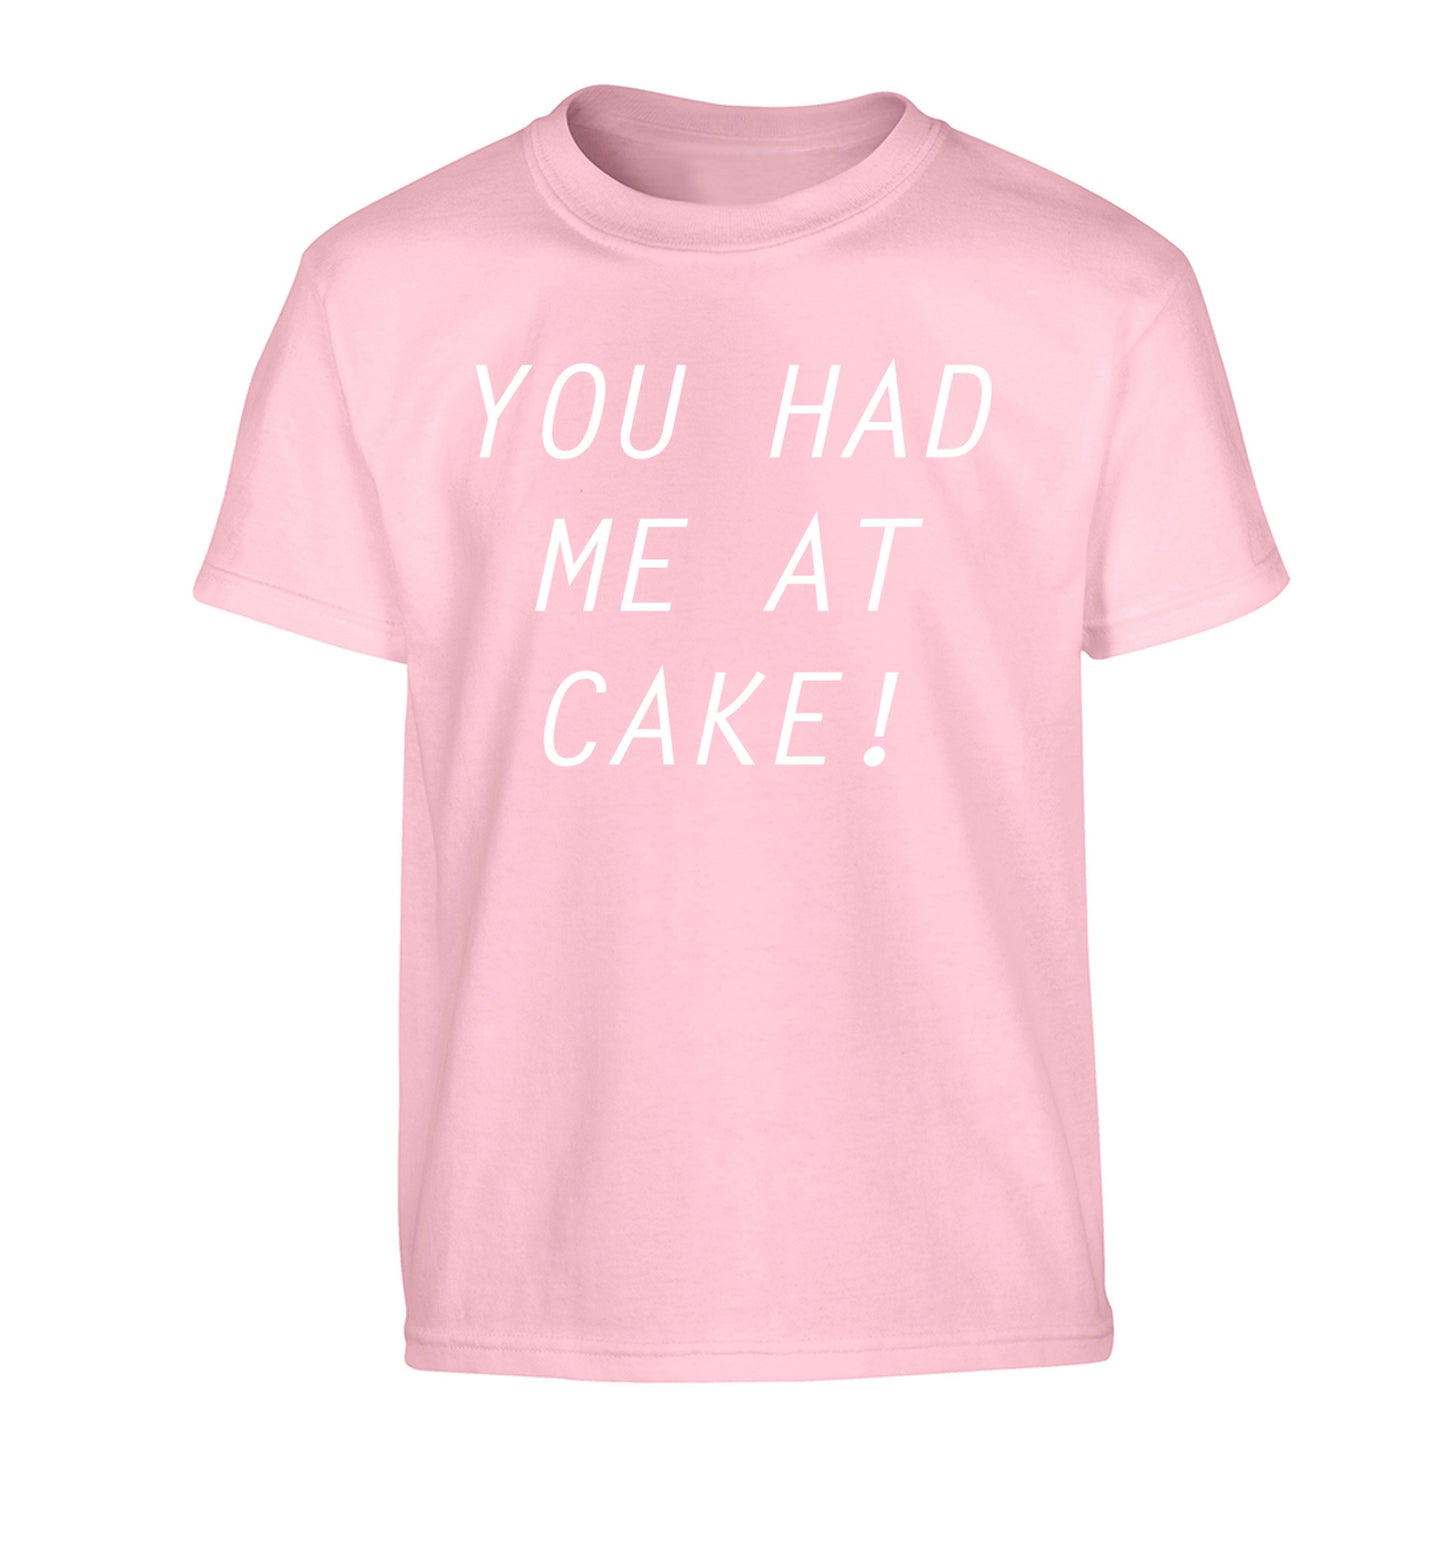 You had me at cake Children's light pink Tshirt 12-14 Years